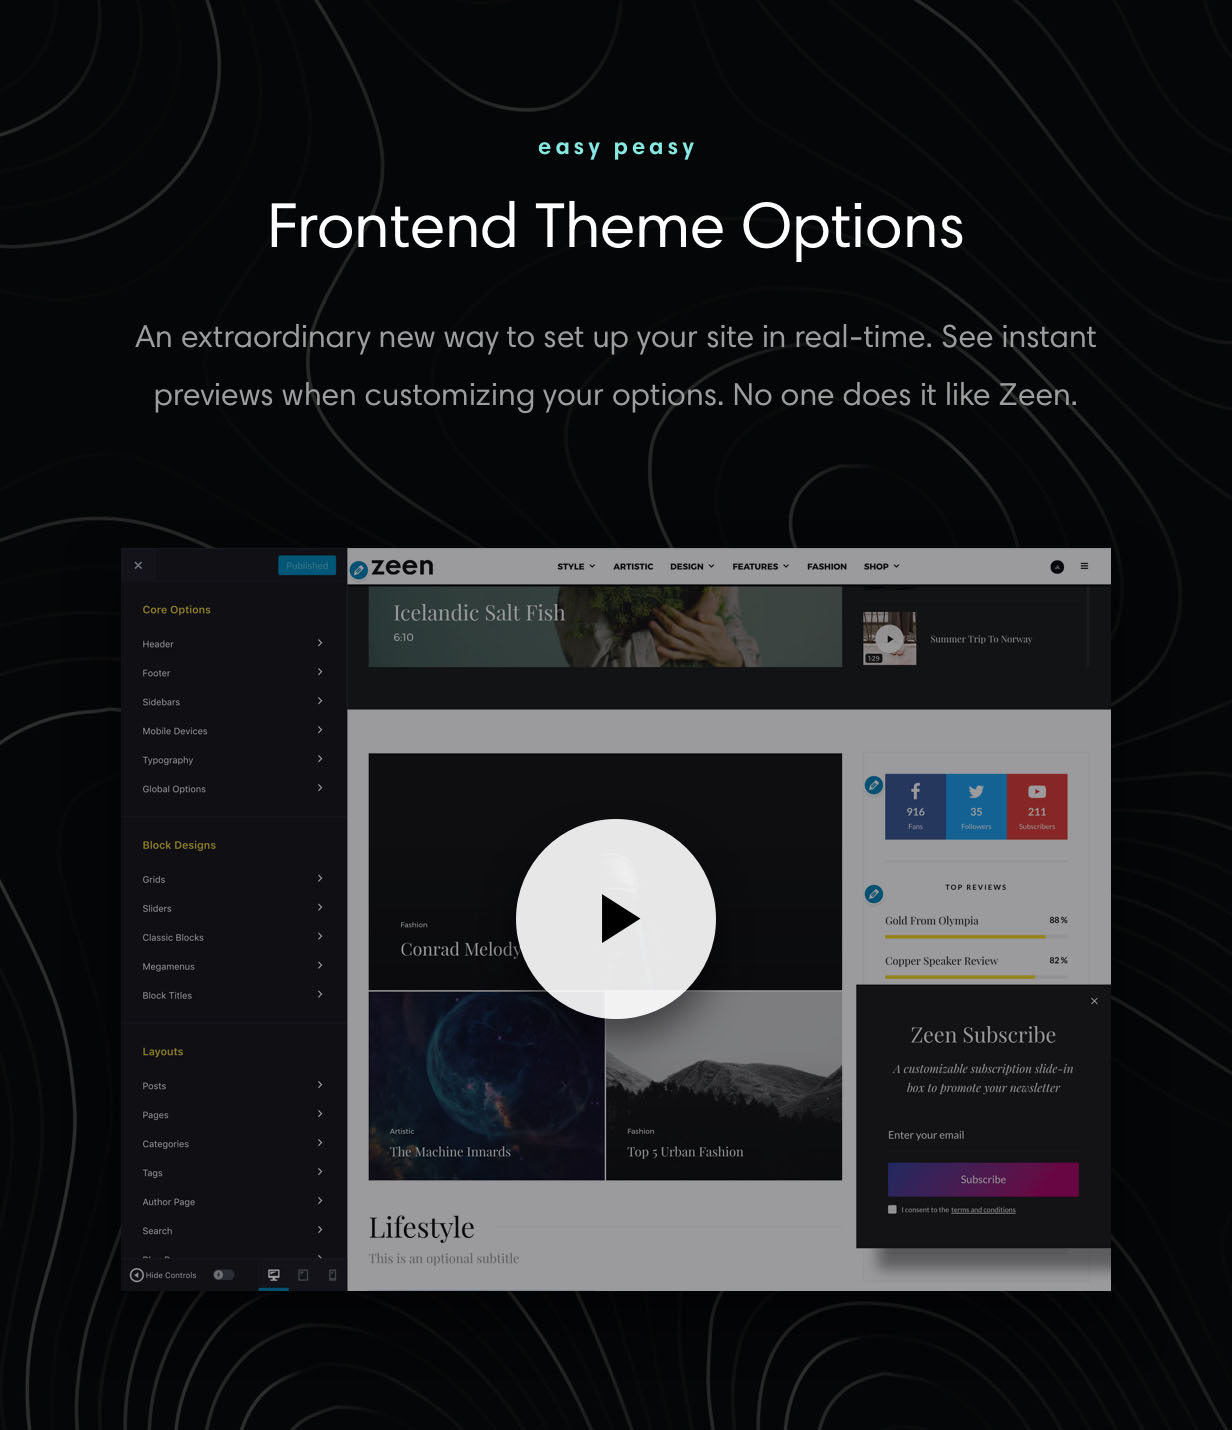 Zeen Theme Options are 100% frontend